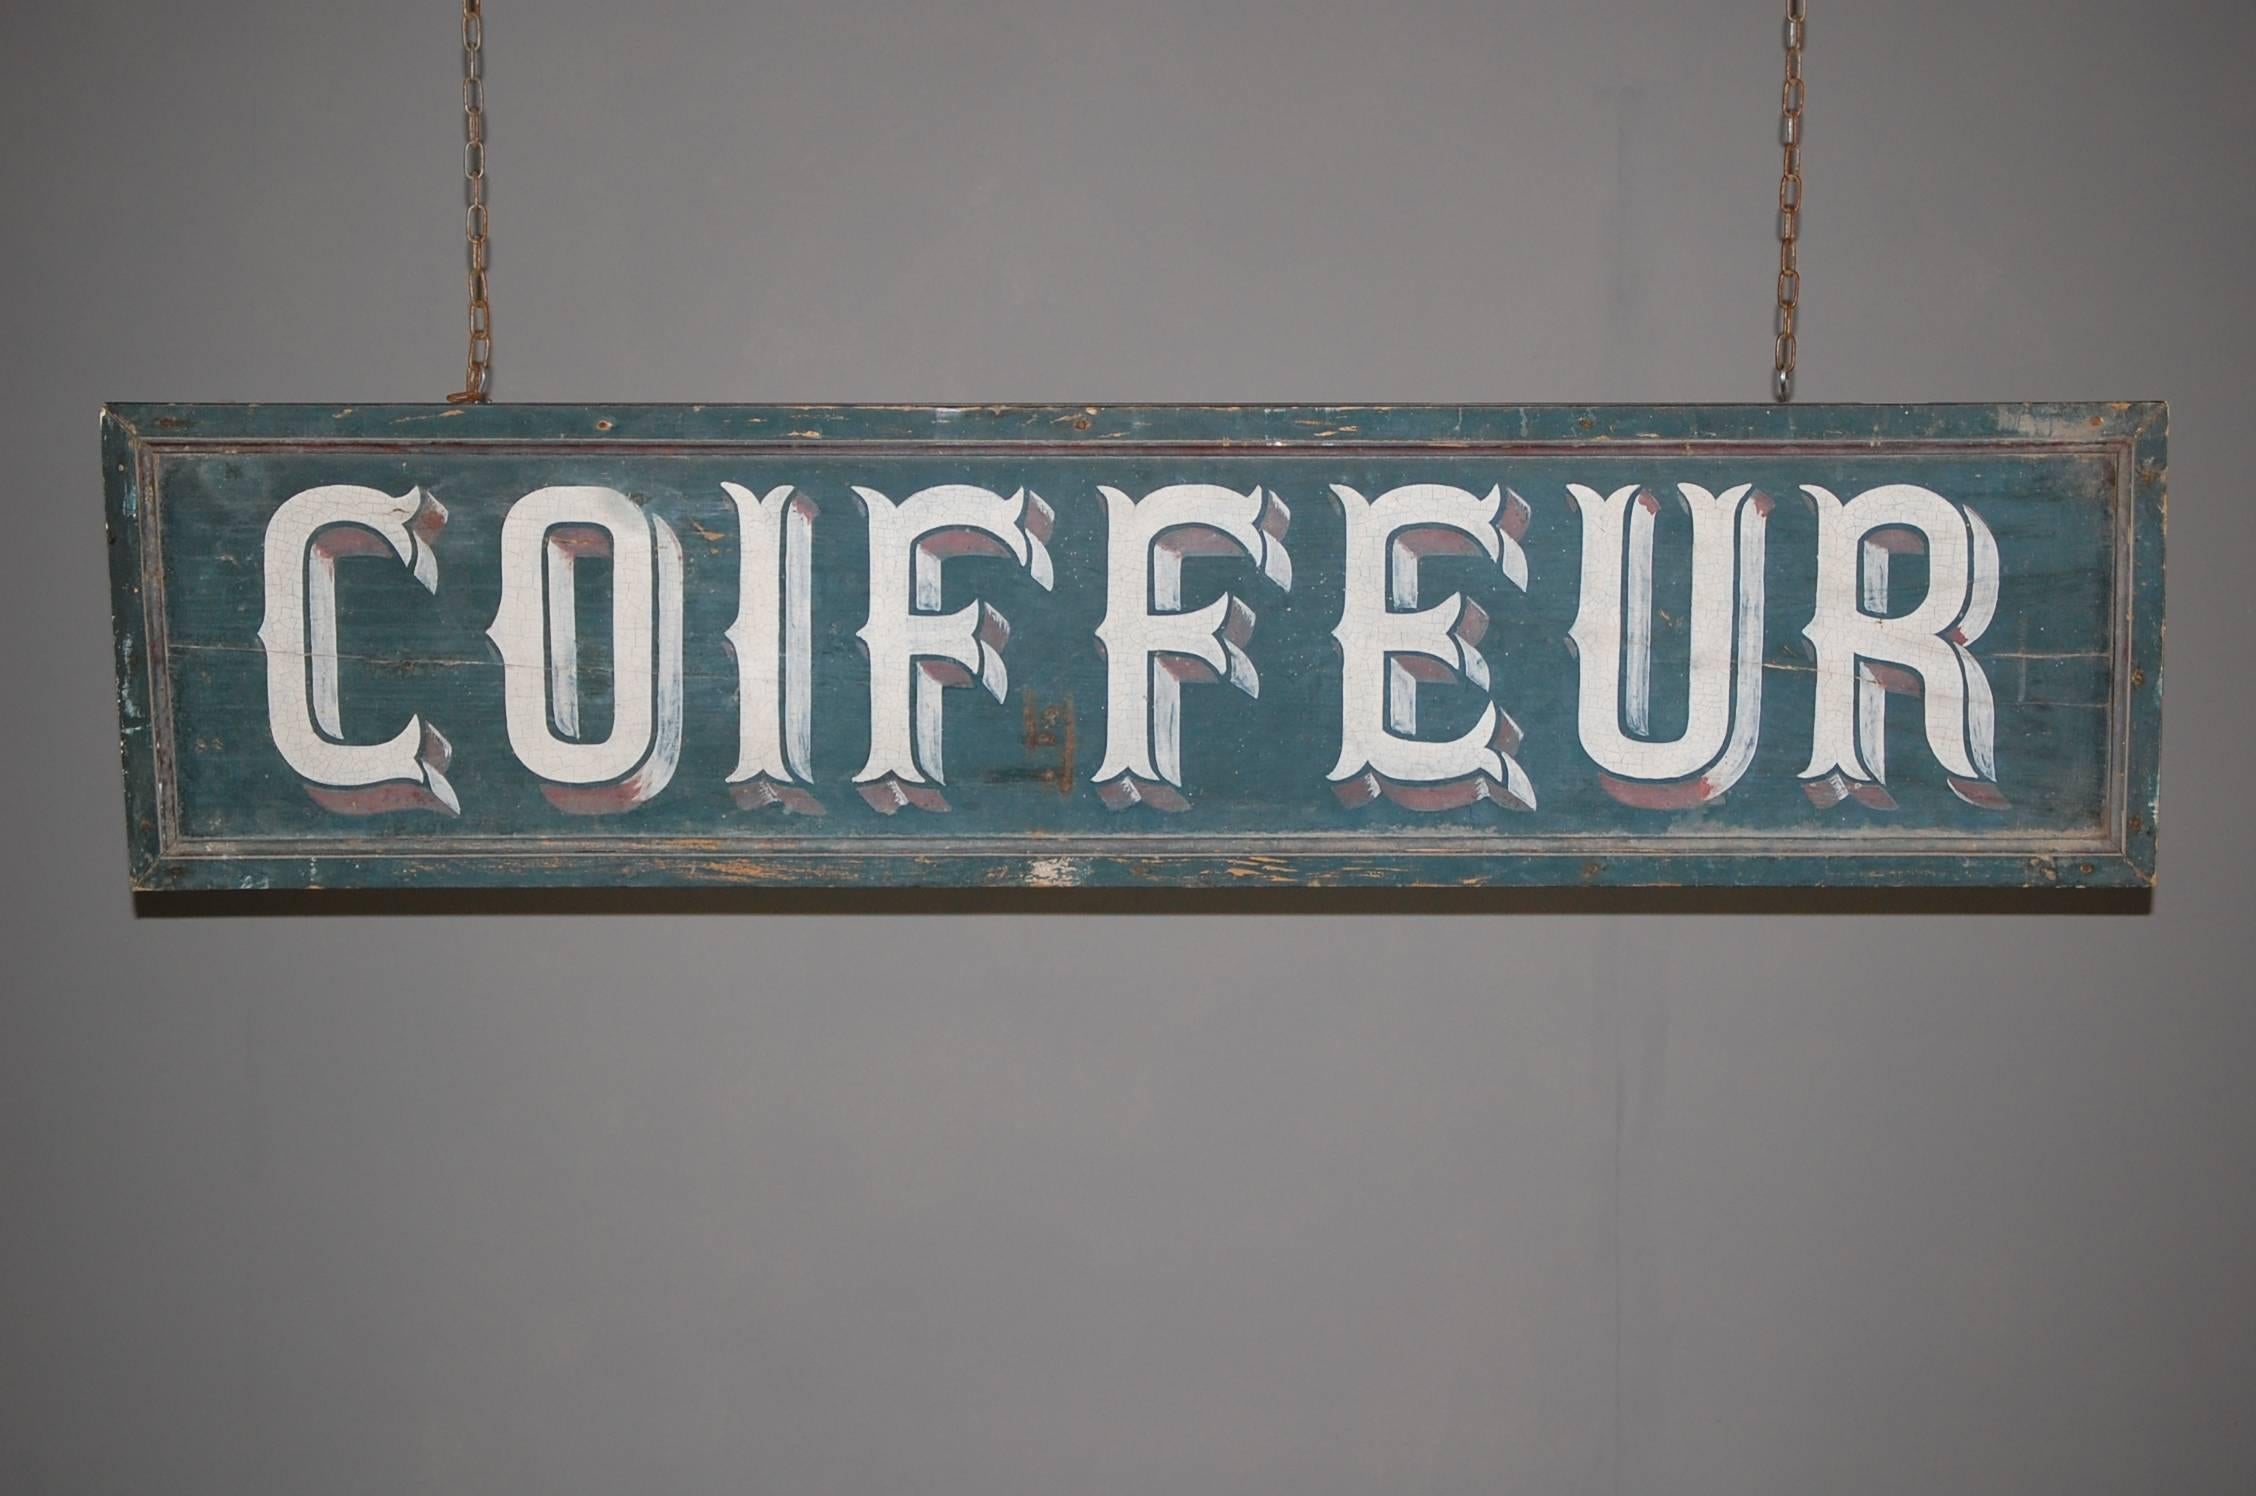 French Coiffeur or hairdresser trade sign hand-painted on timber boards wonderful patination, some light damage and distressing with minor paint loss in places.